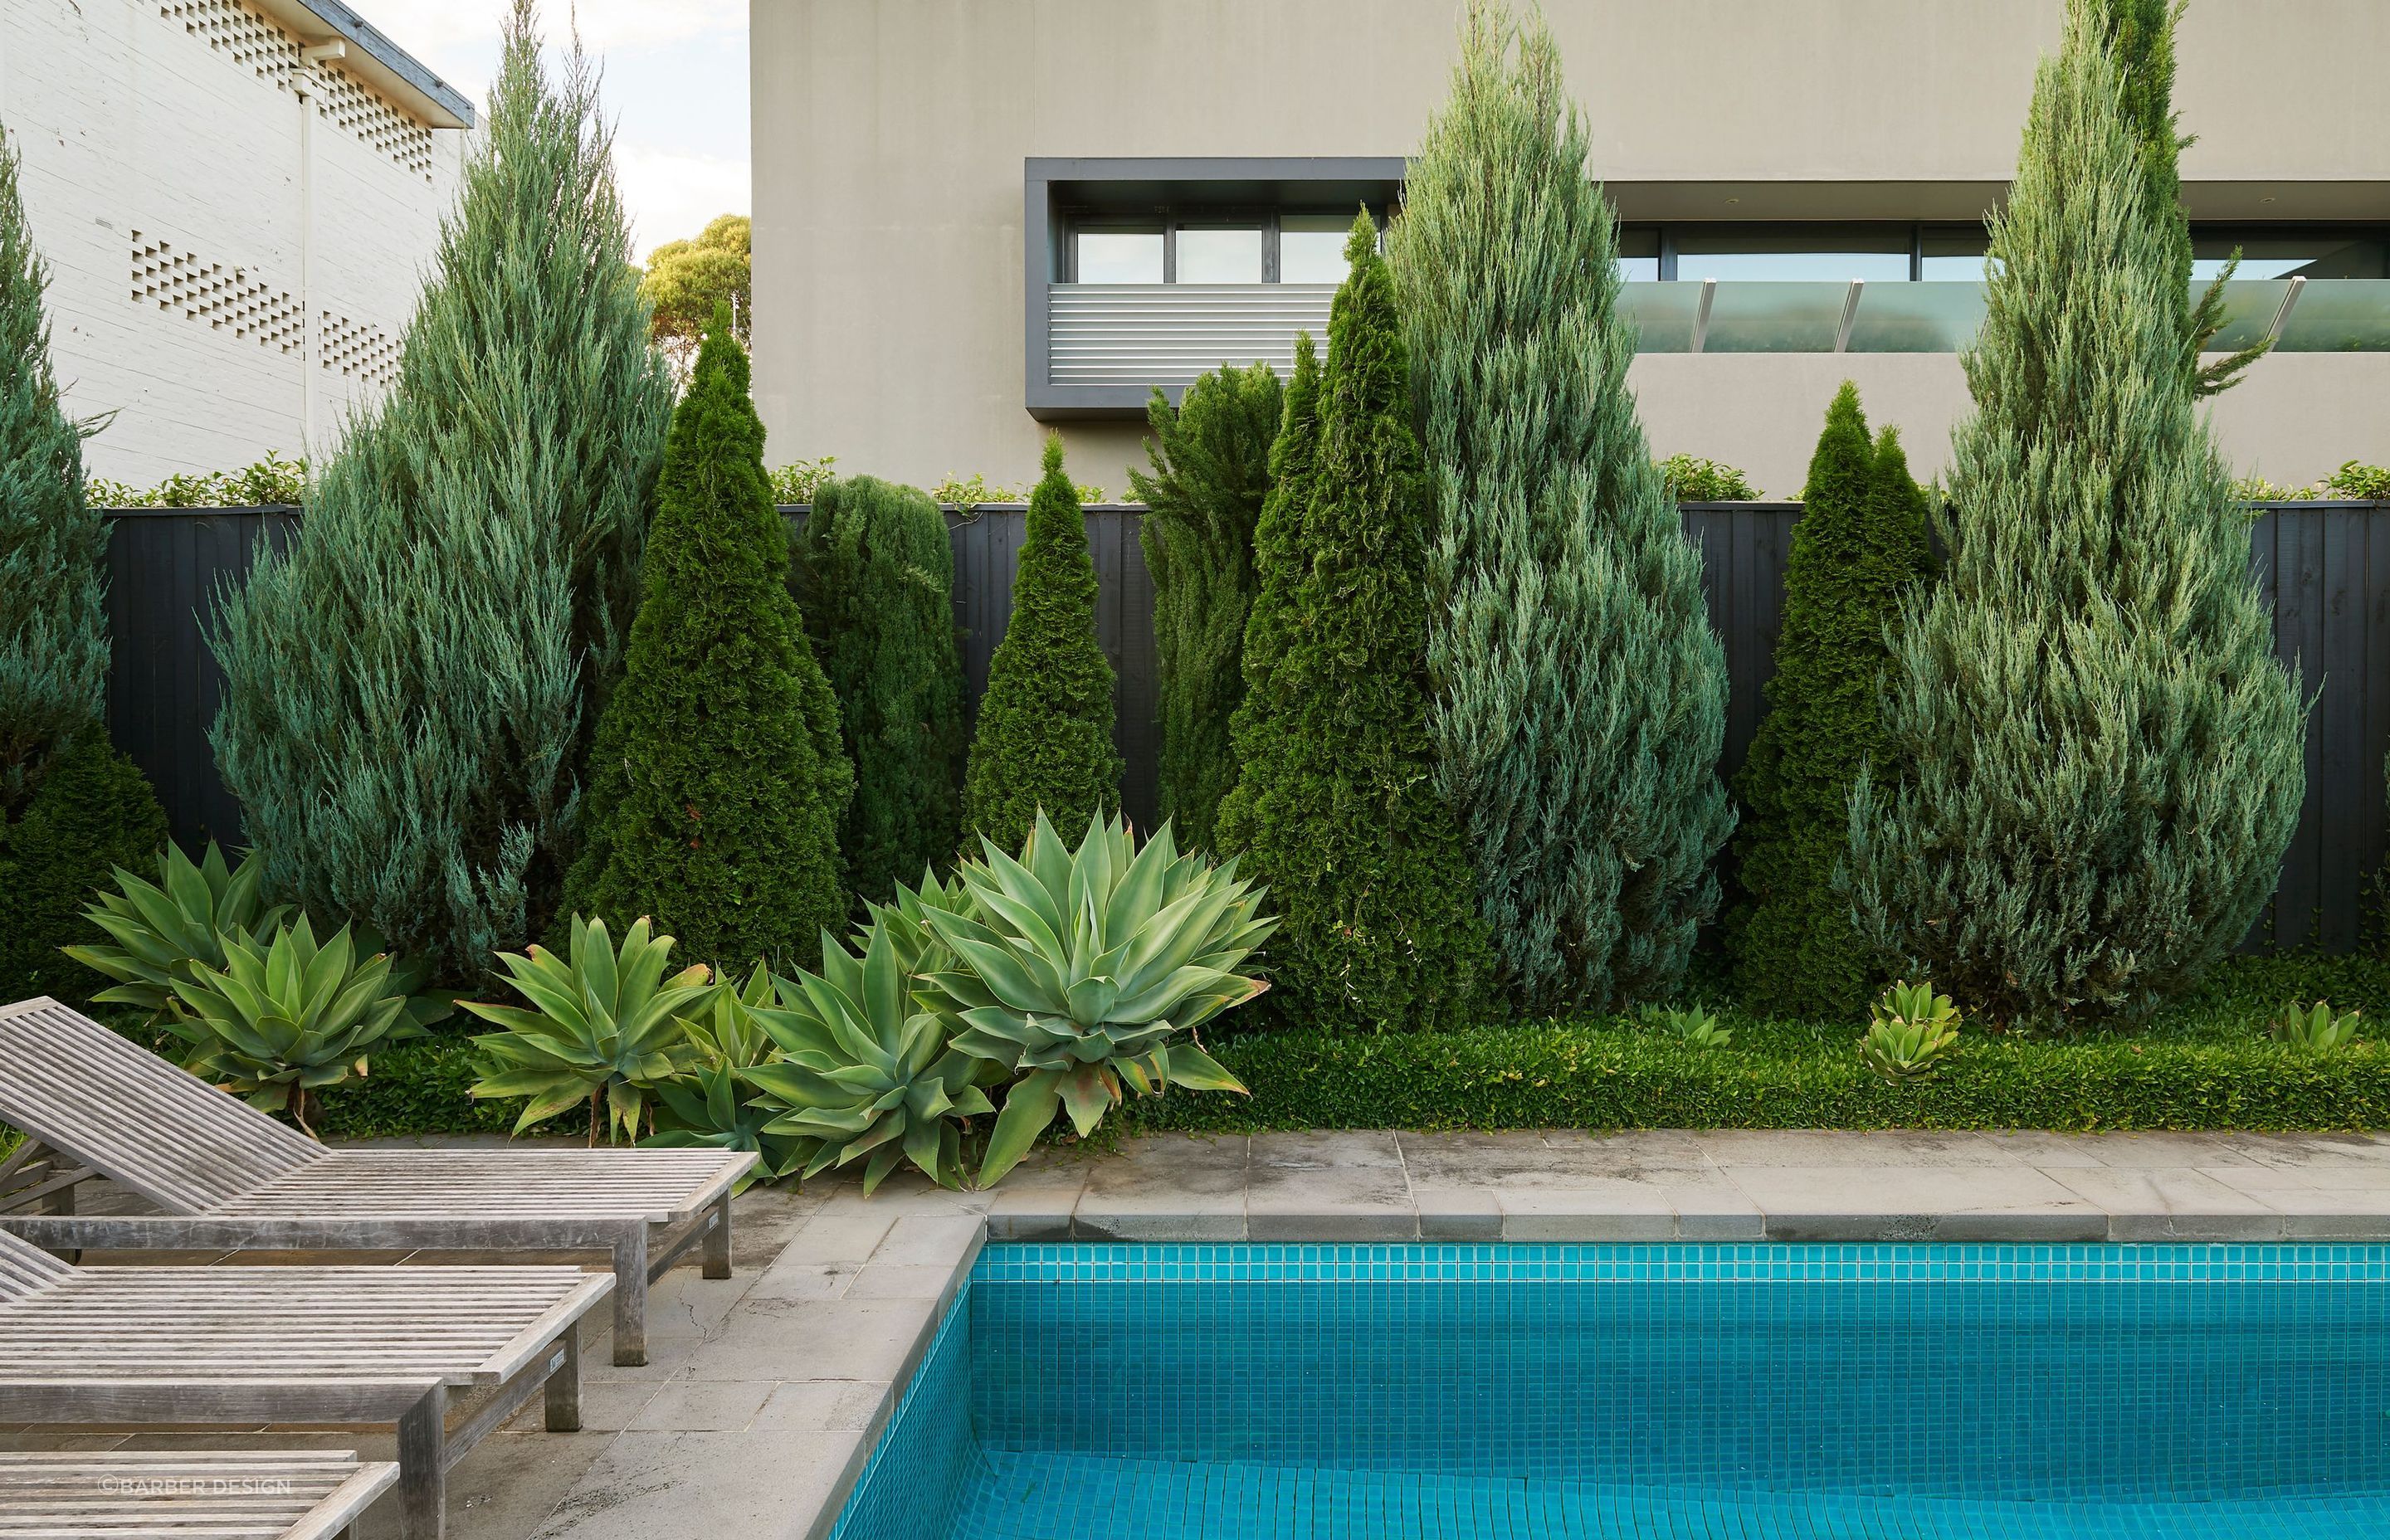 This pool's landscaping features an eclectic mix of agave plants, shrubby and columnar evergreens. Featured project: Toorak - Barber Design